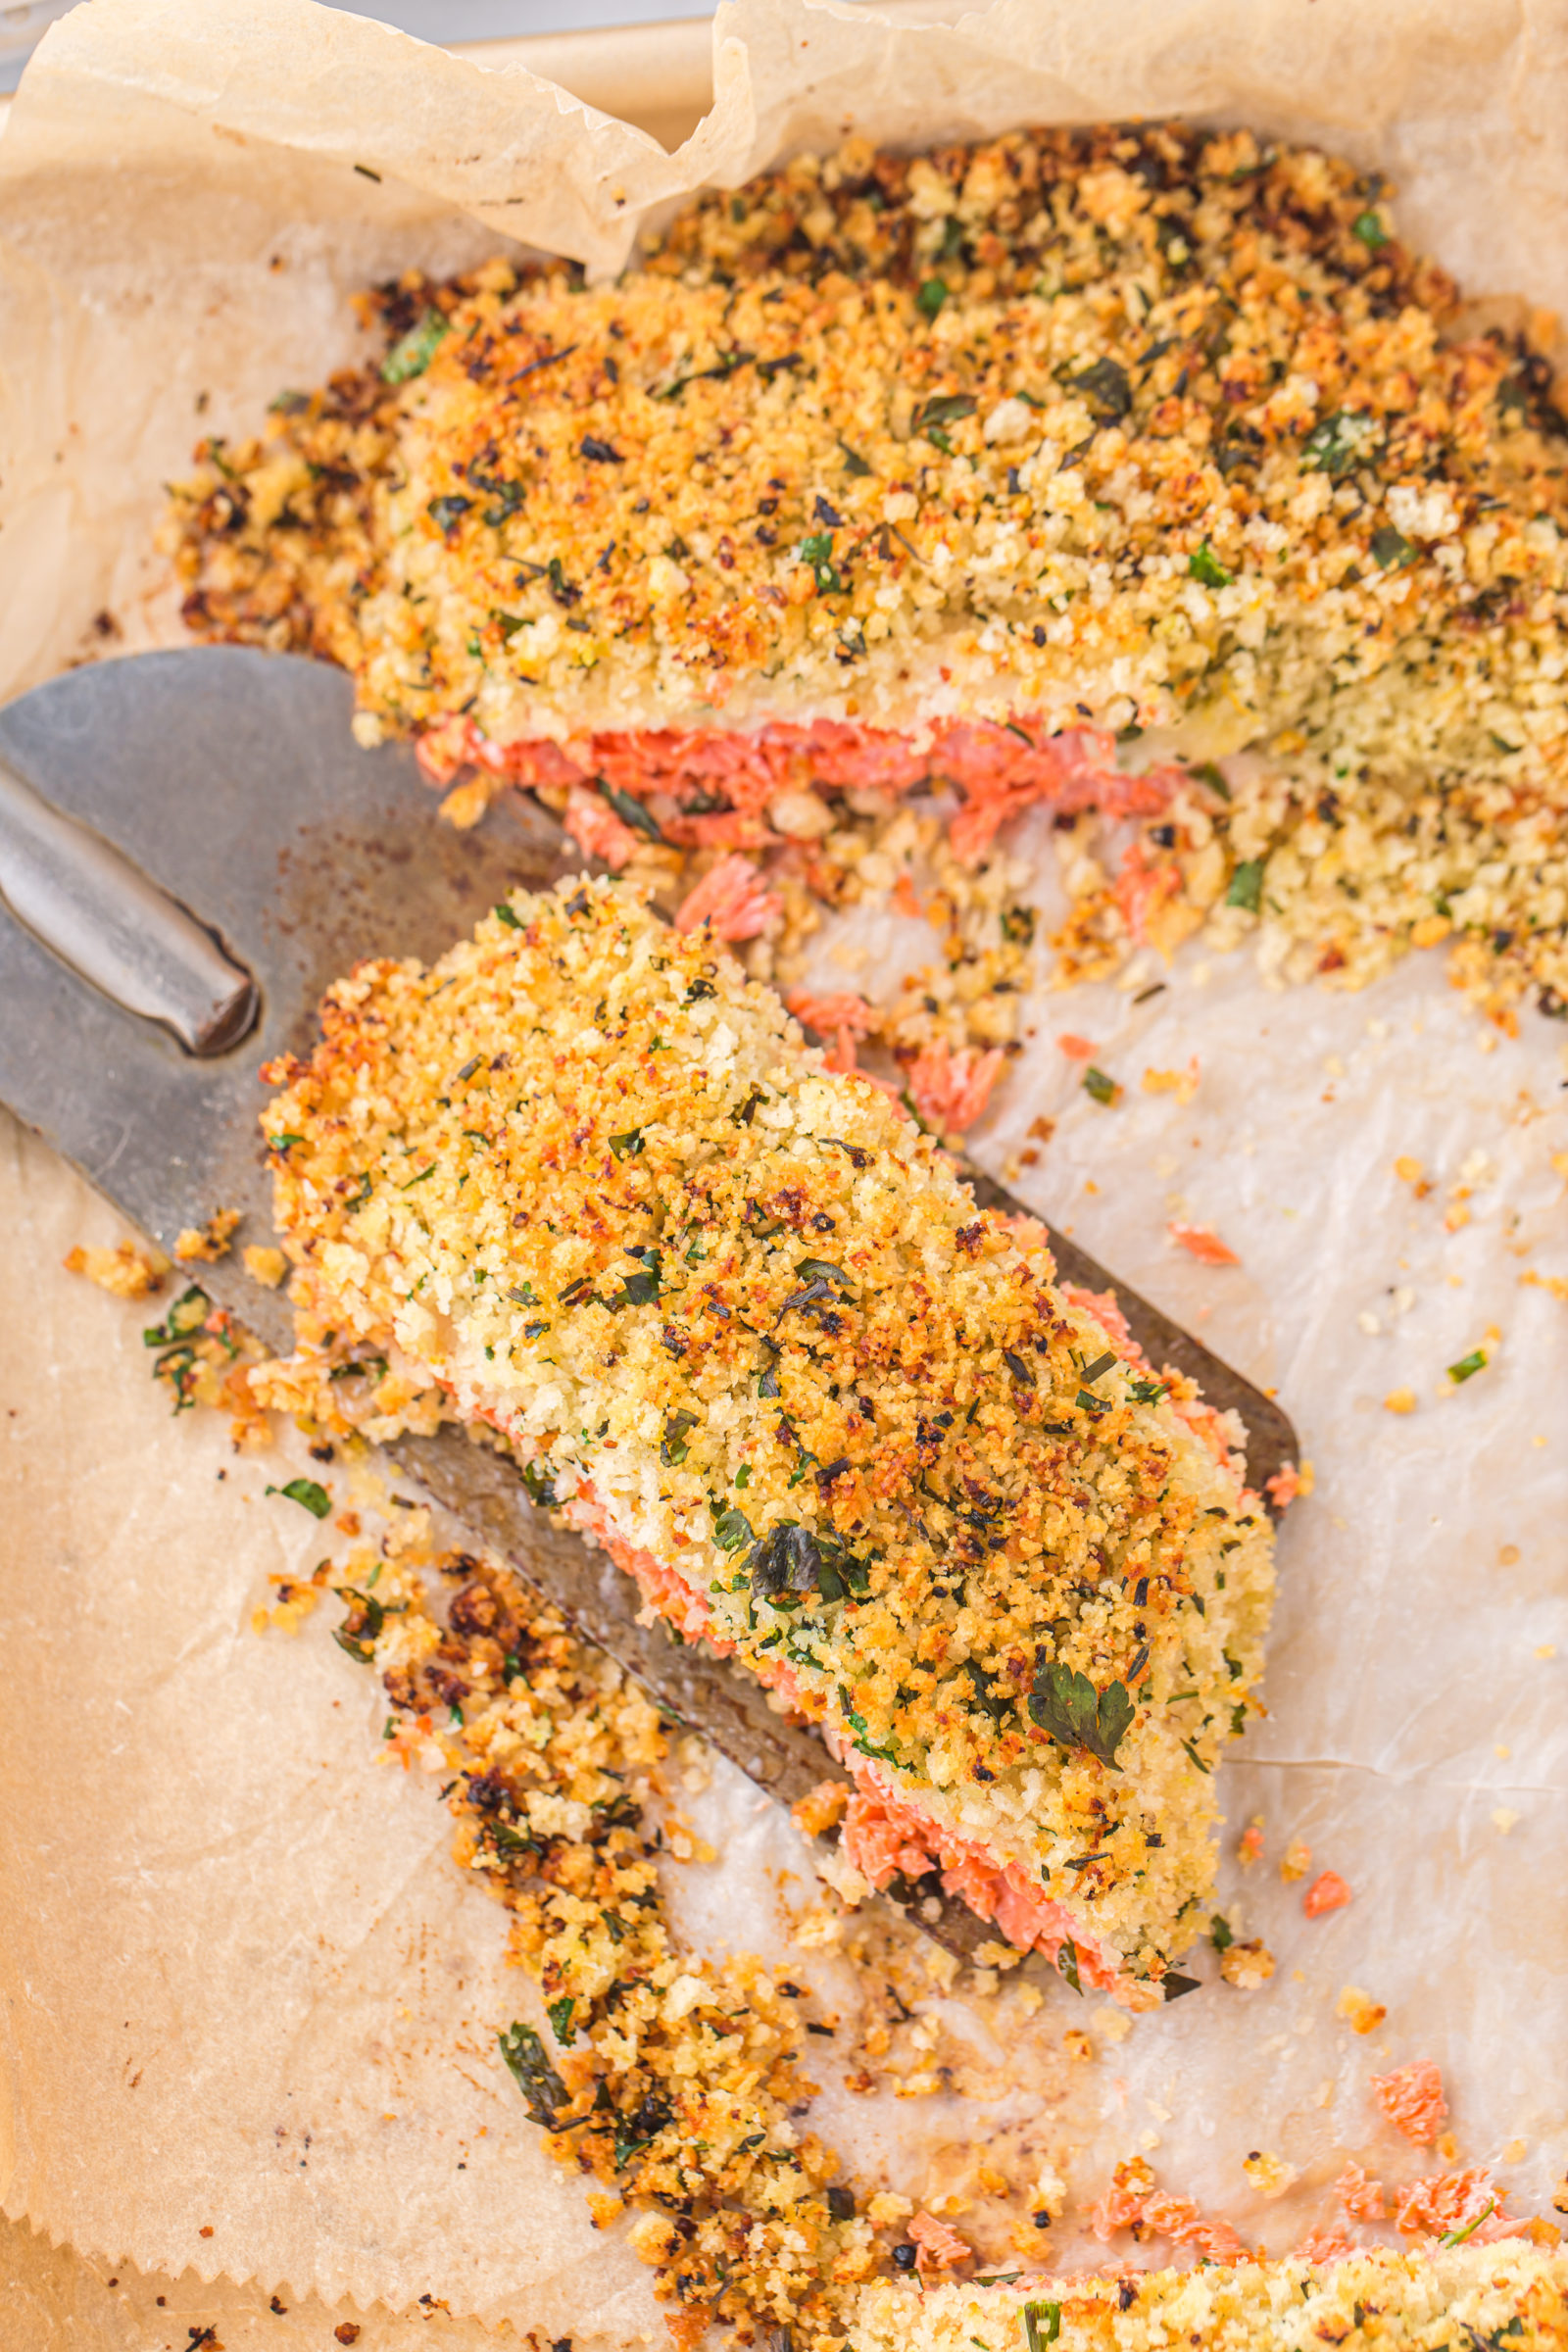 An overhead view of an herb and panko crusted salmon filet on a parchment lined baking sheet.